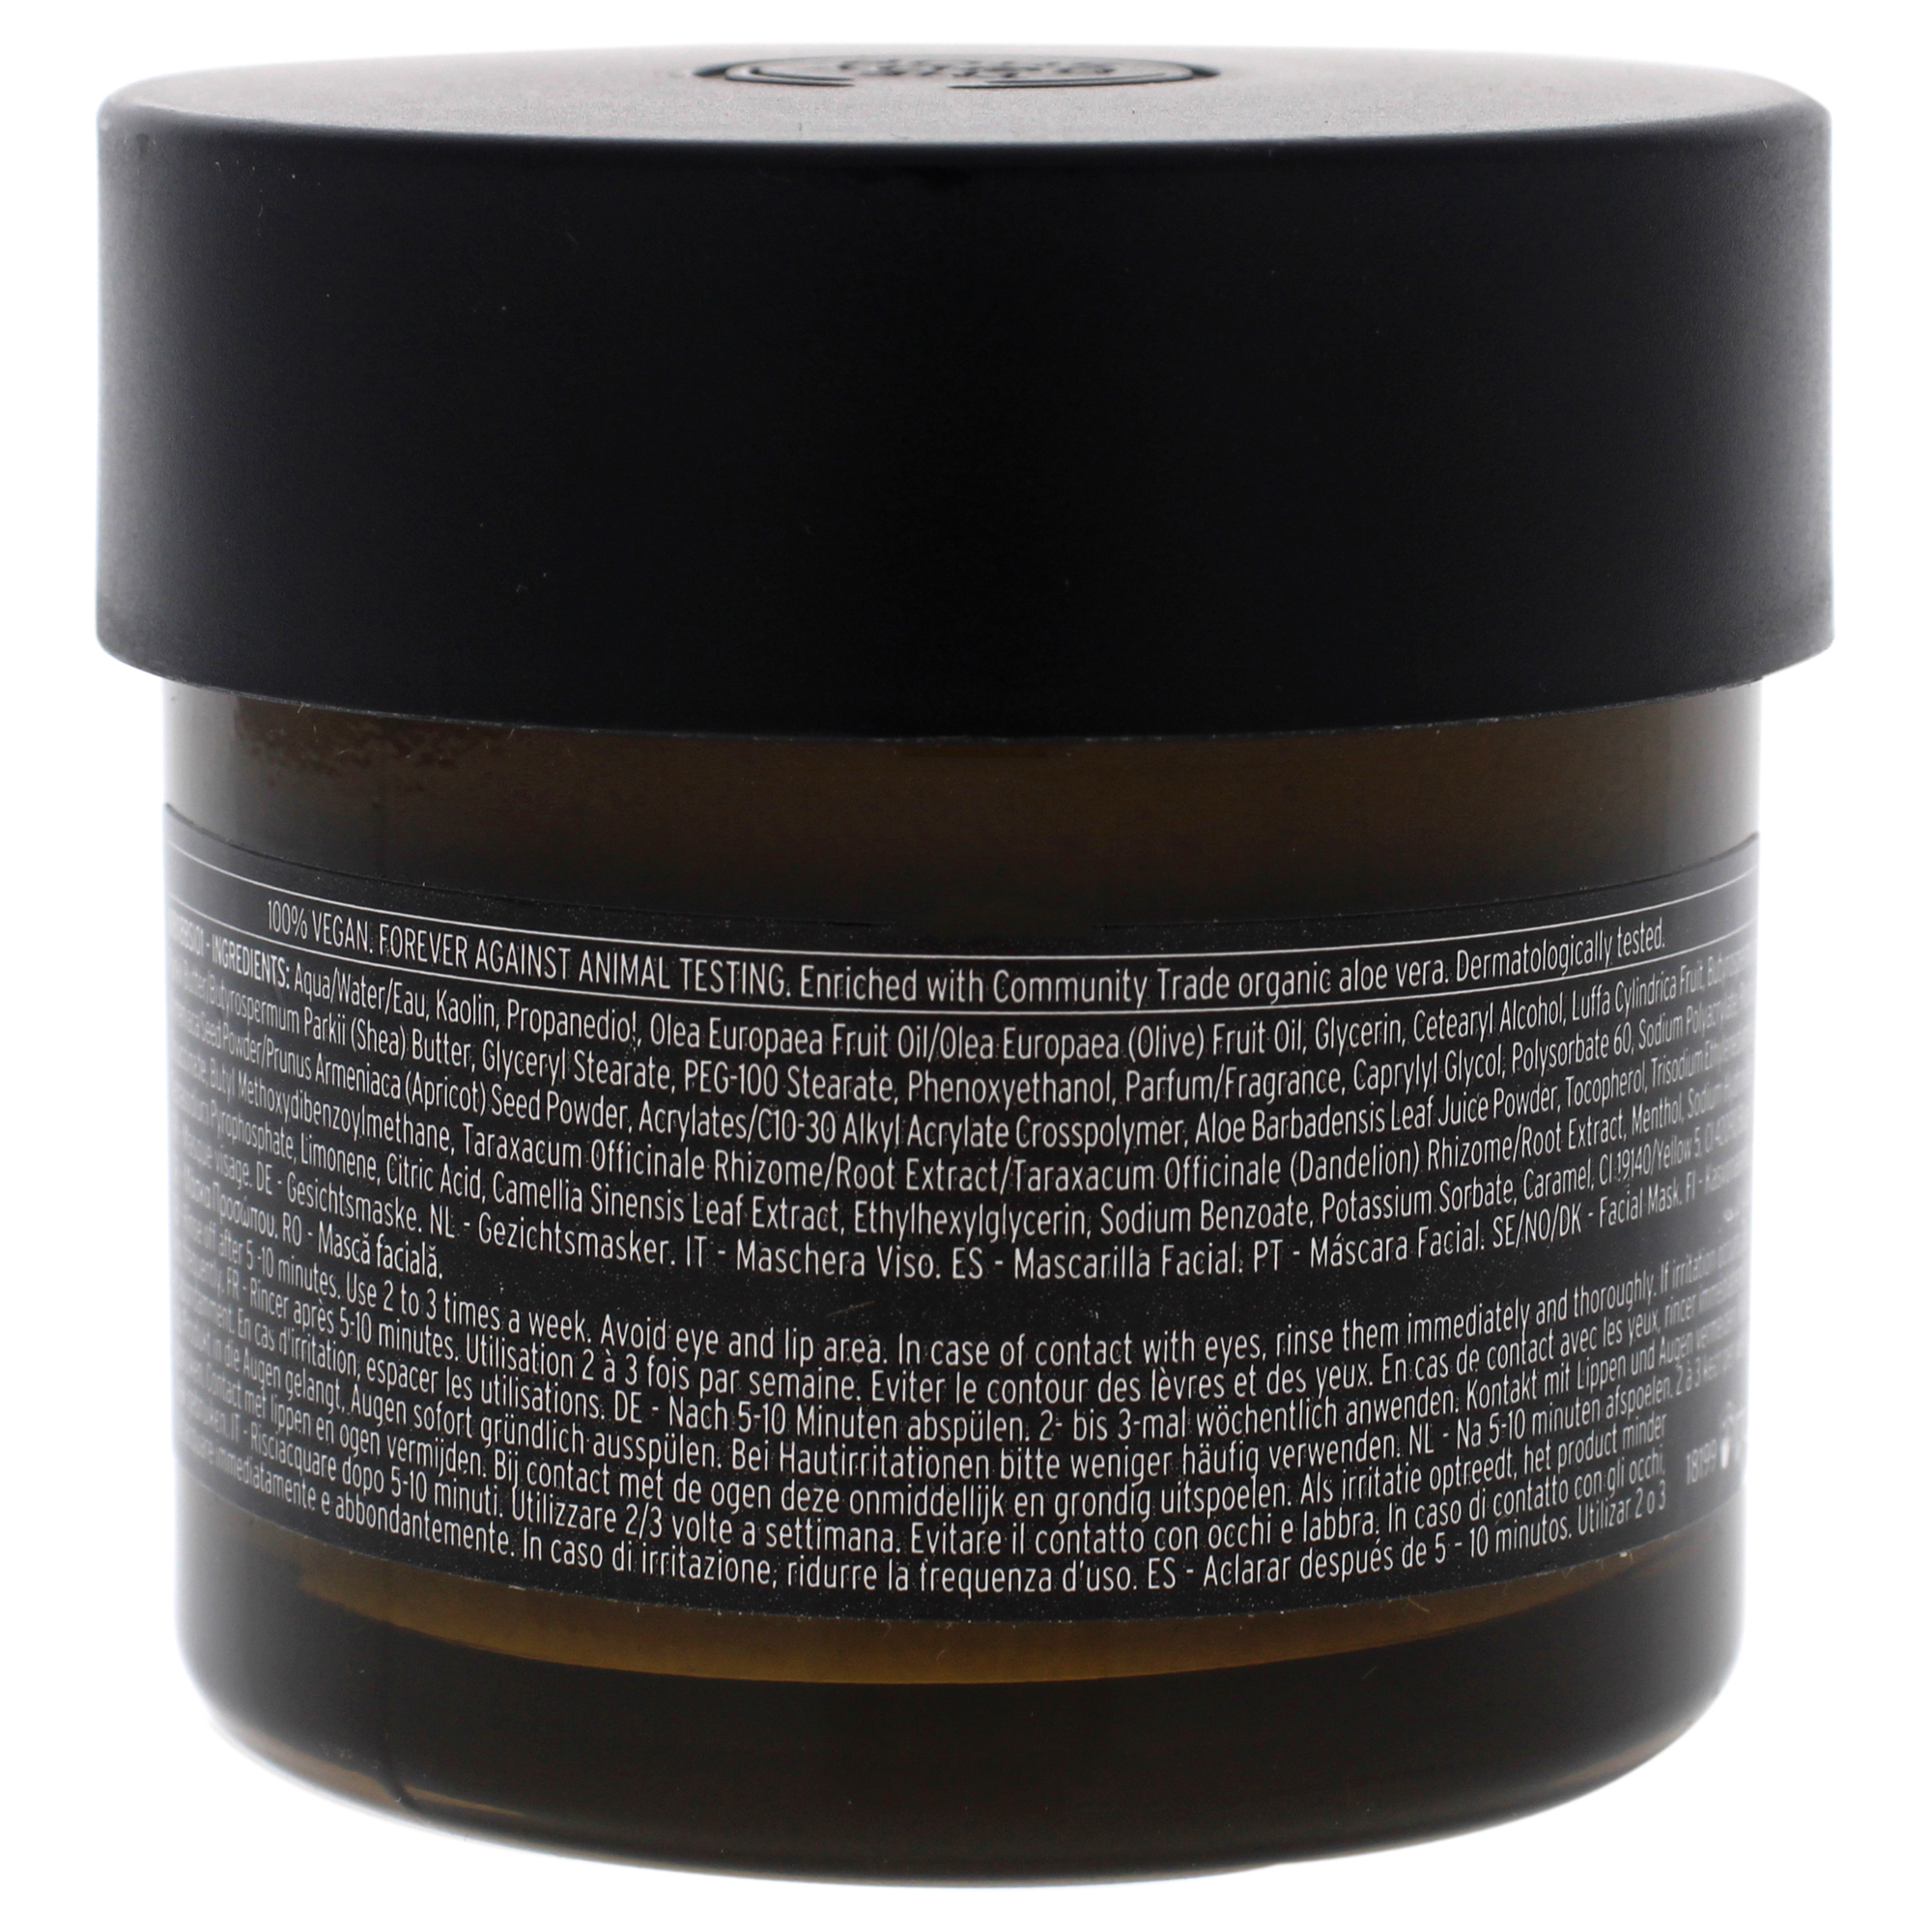 Japanese Matcha Tea Pollution Clearing Mask by The Body Shop for Unisex - 2.6 oz Mask - image 2 of 2